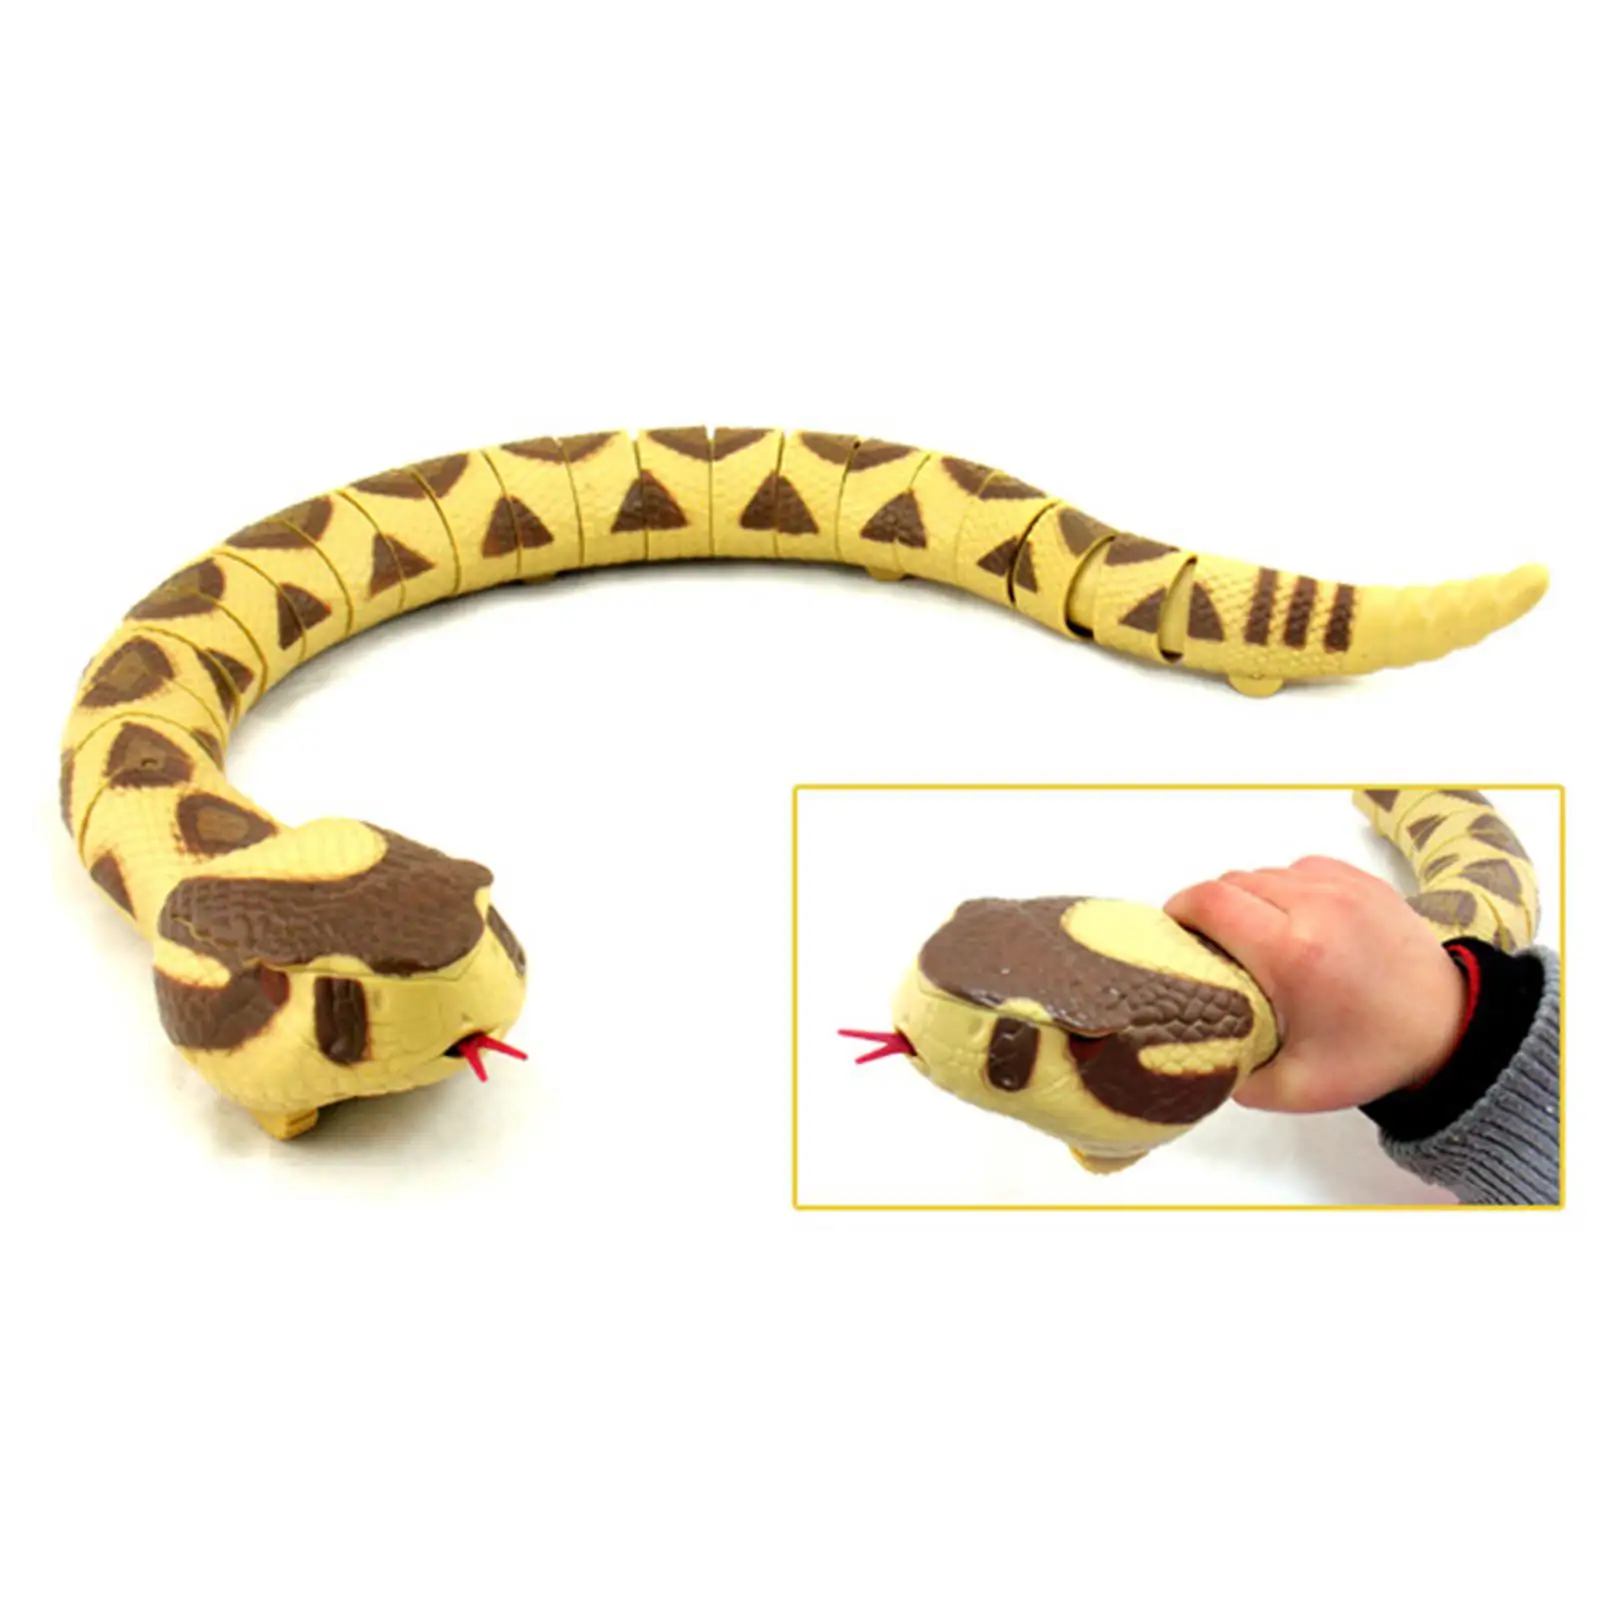 Realistic RC Snake Toys Halloween Tricks Toy for Party Tricks Tabletop Decors Gifts